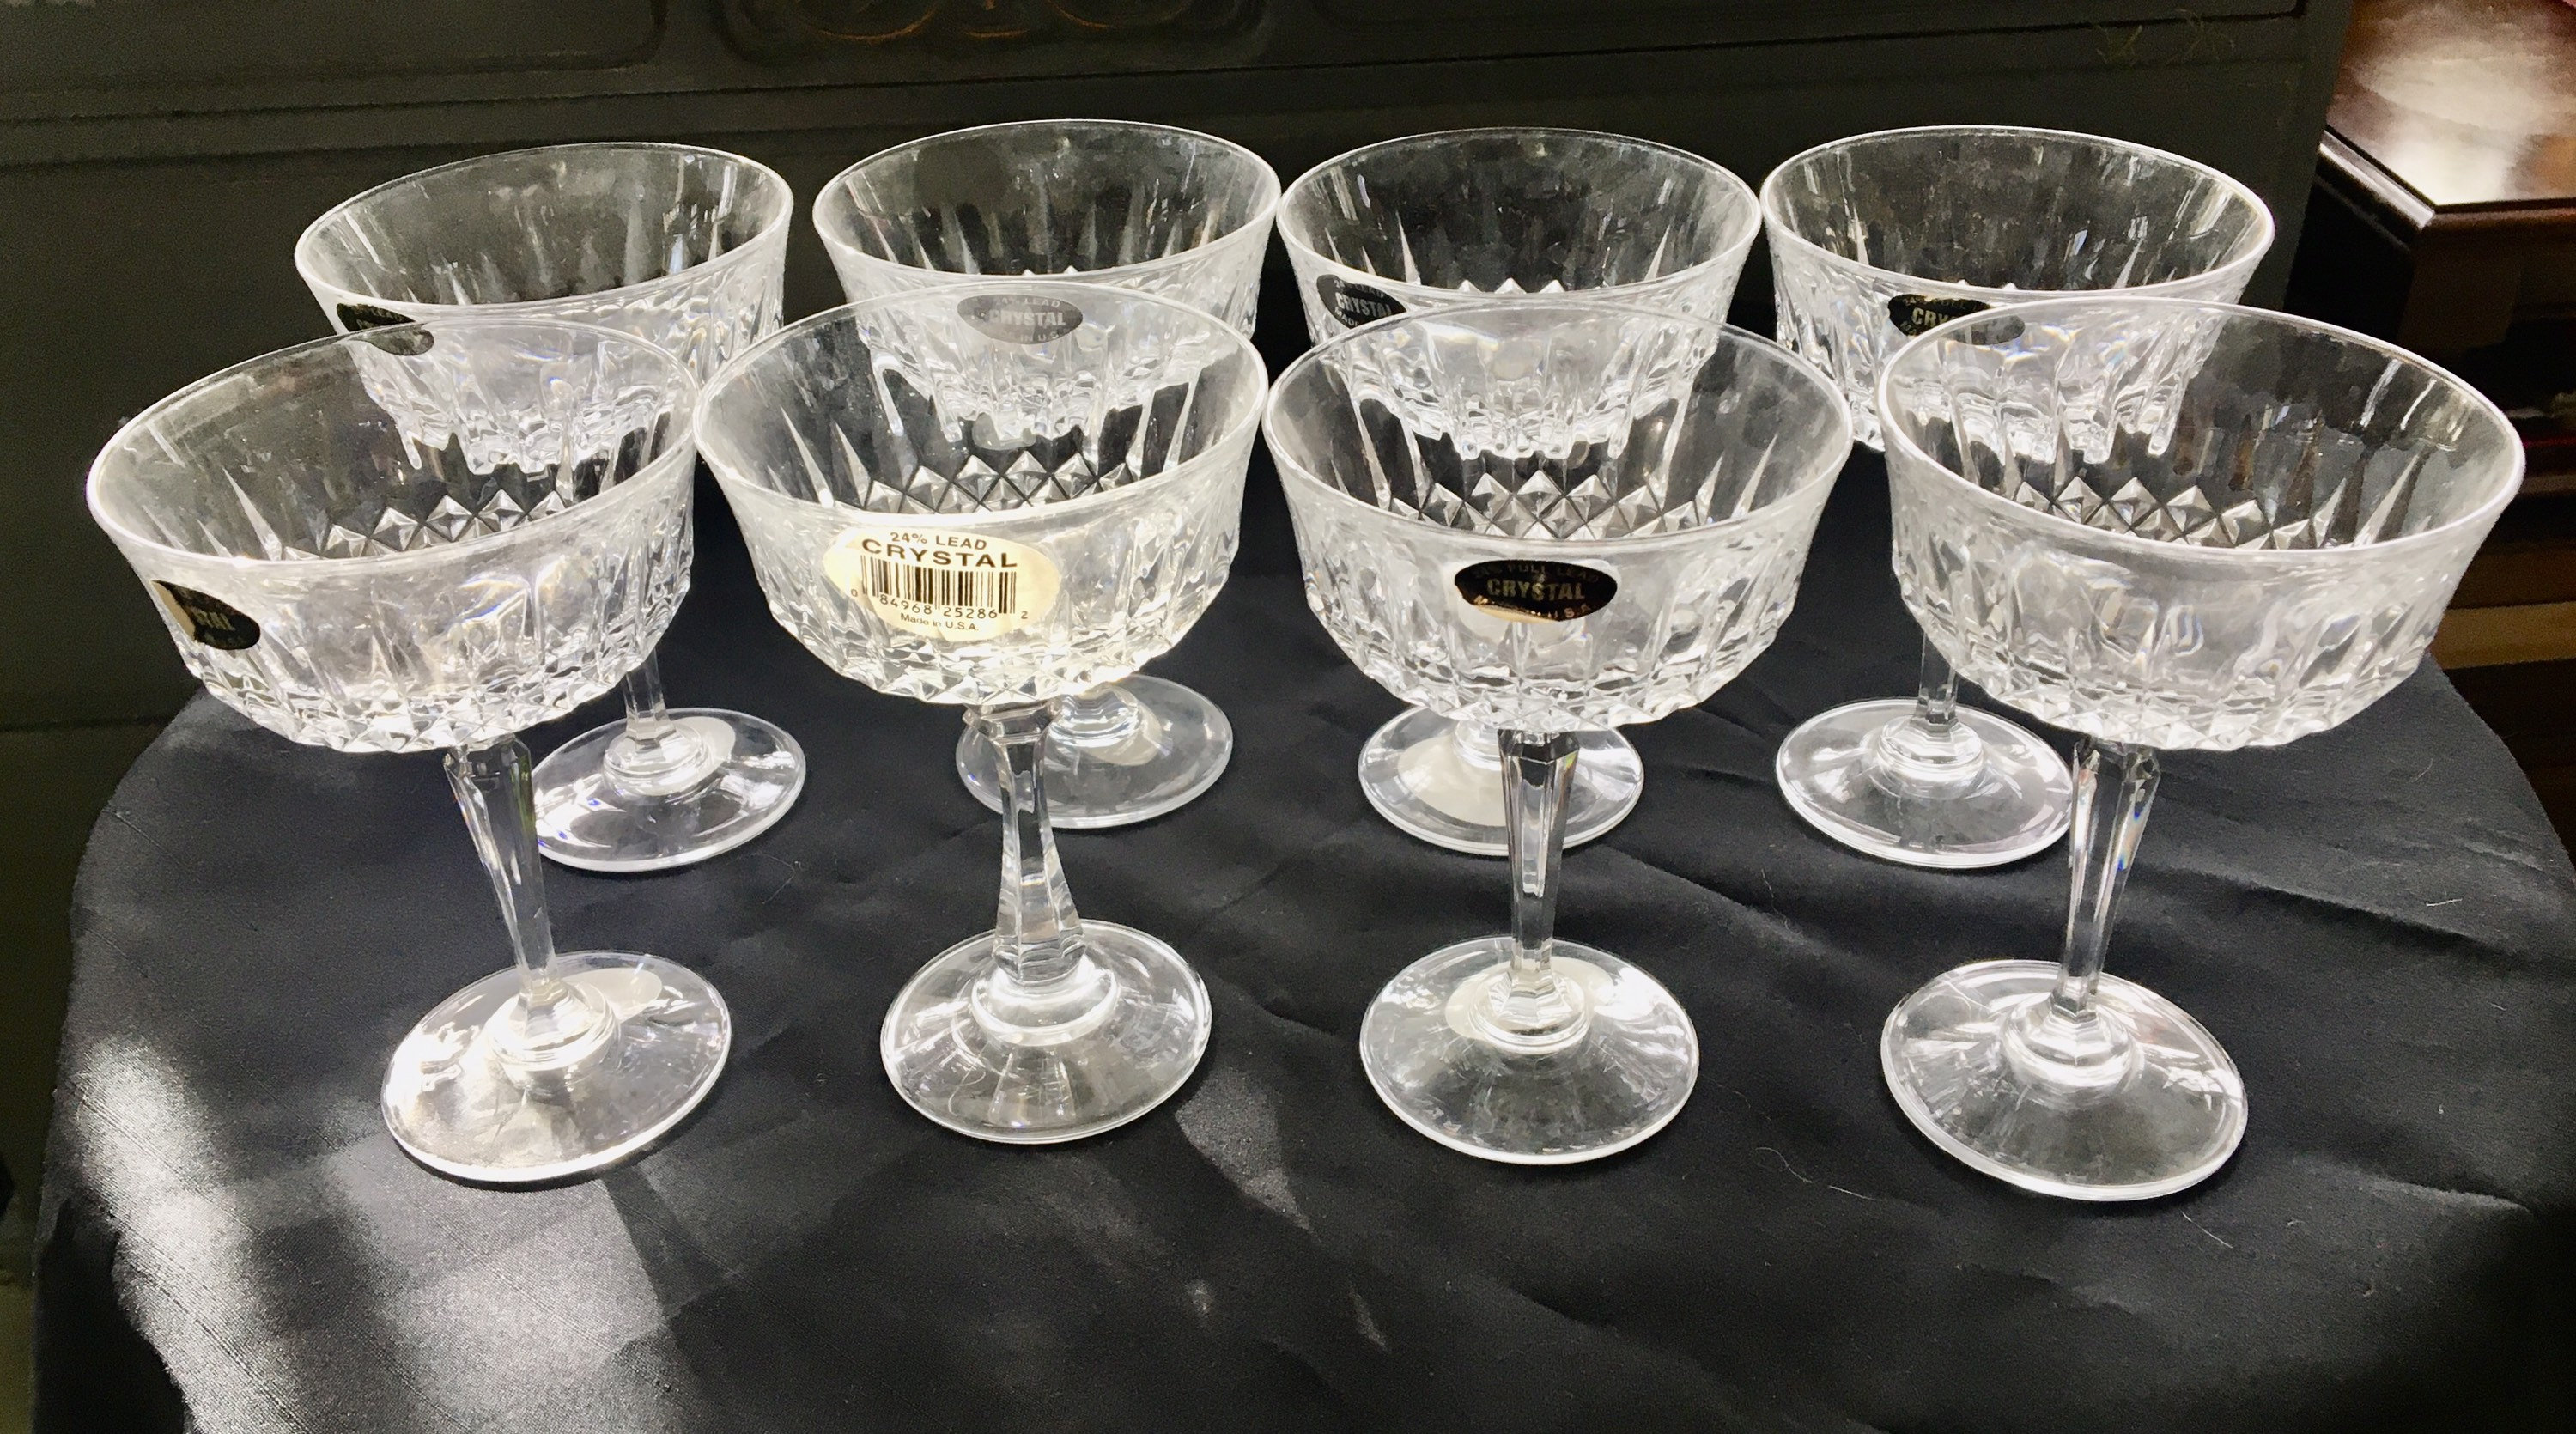 Crystal Sherbets/crystal Champagne Glasses/wedding Party Champagne Glasses- set of 8 